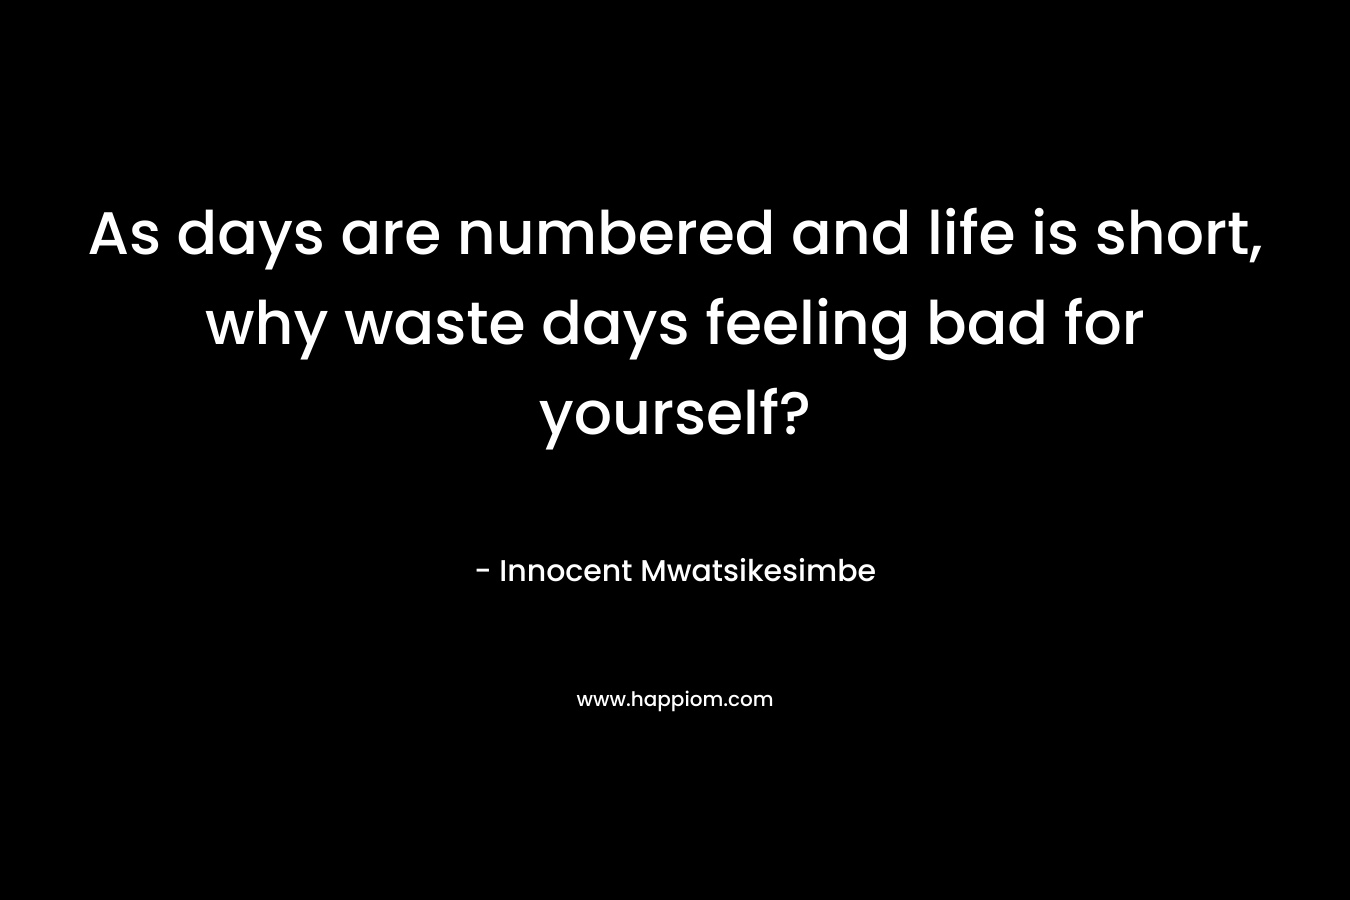 As days are numbered and life is short, why waste days feeling bad for yourself? – Innocent Mwatsikesimbe